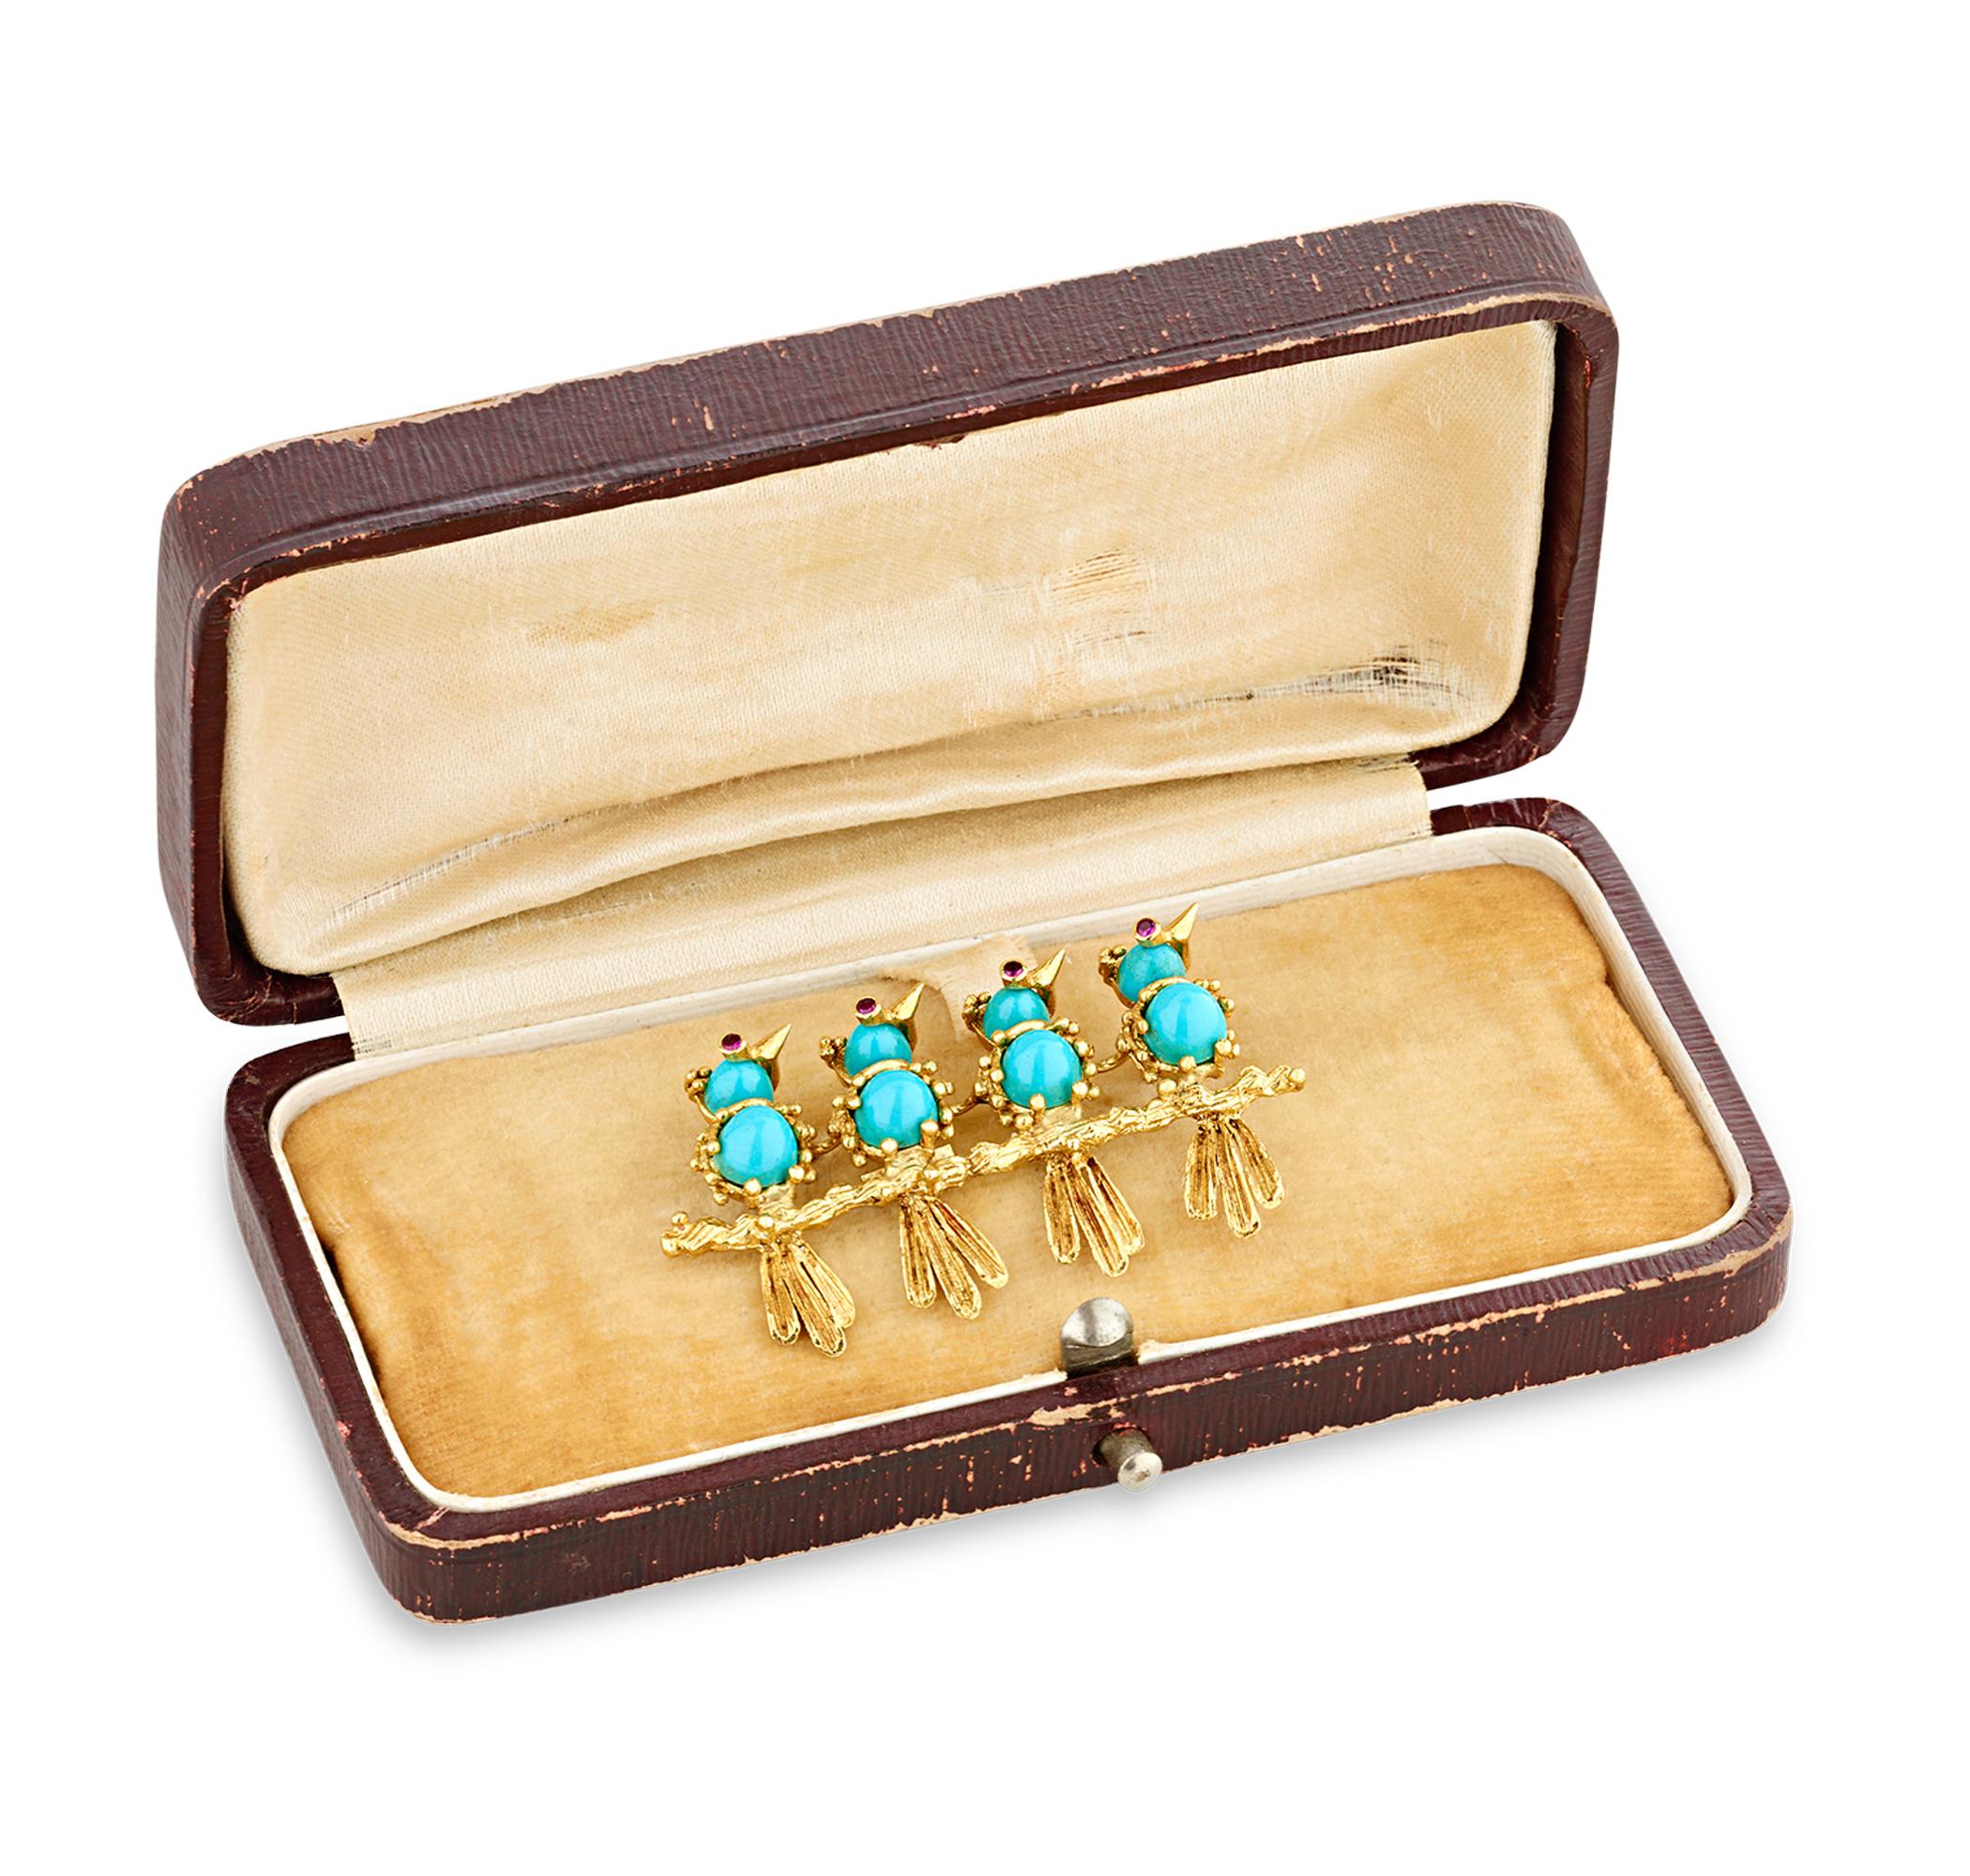 This exquisite brooch by Cartier, one of the world's preeminent jewelers, presents a captivating tableau of four turquoise birds perched on a golden branch. The birds are adorned in gold with meticulously detailed beaks, feathers and feet, and